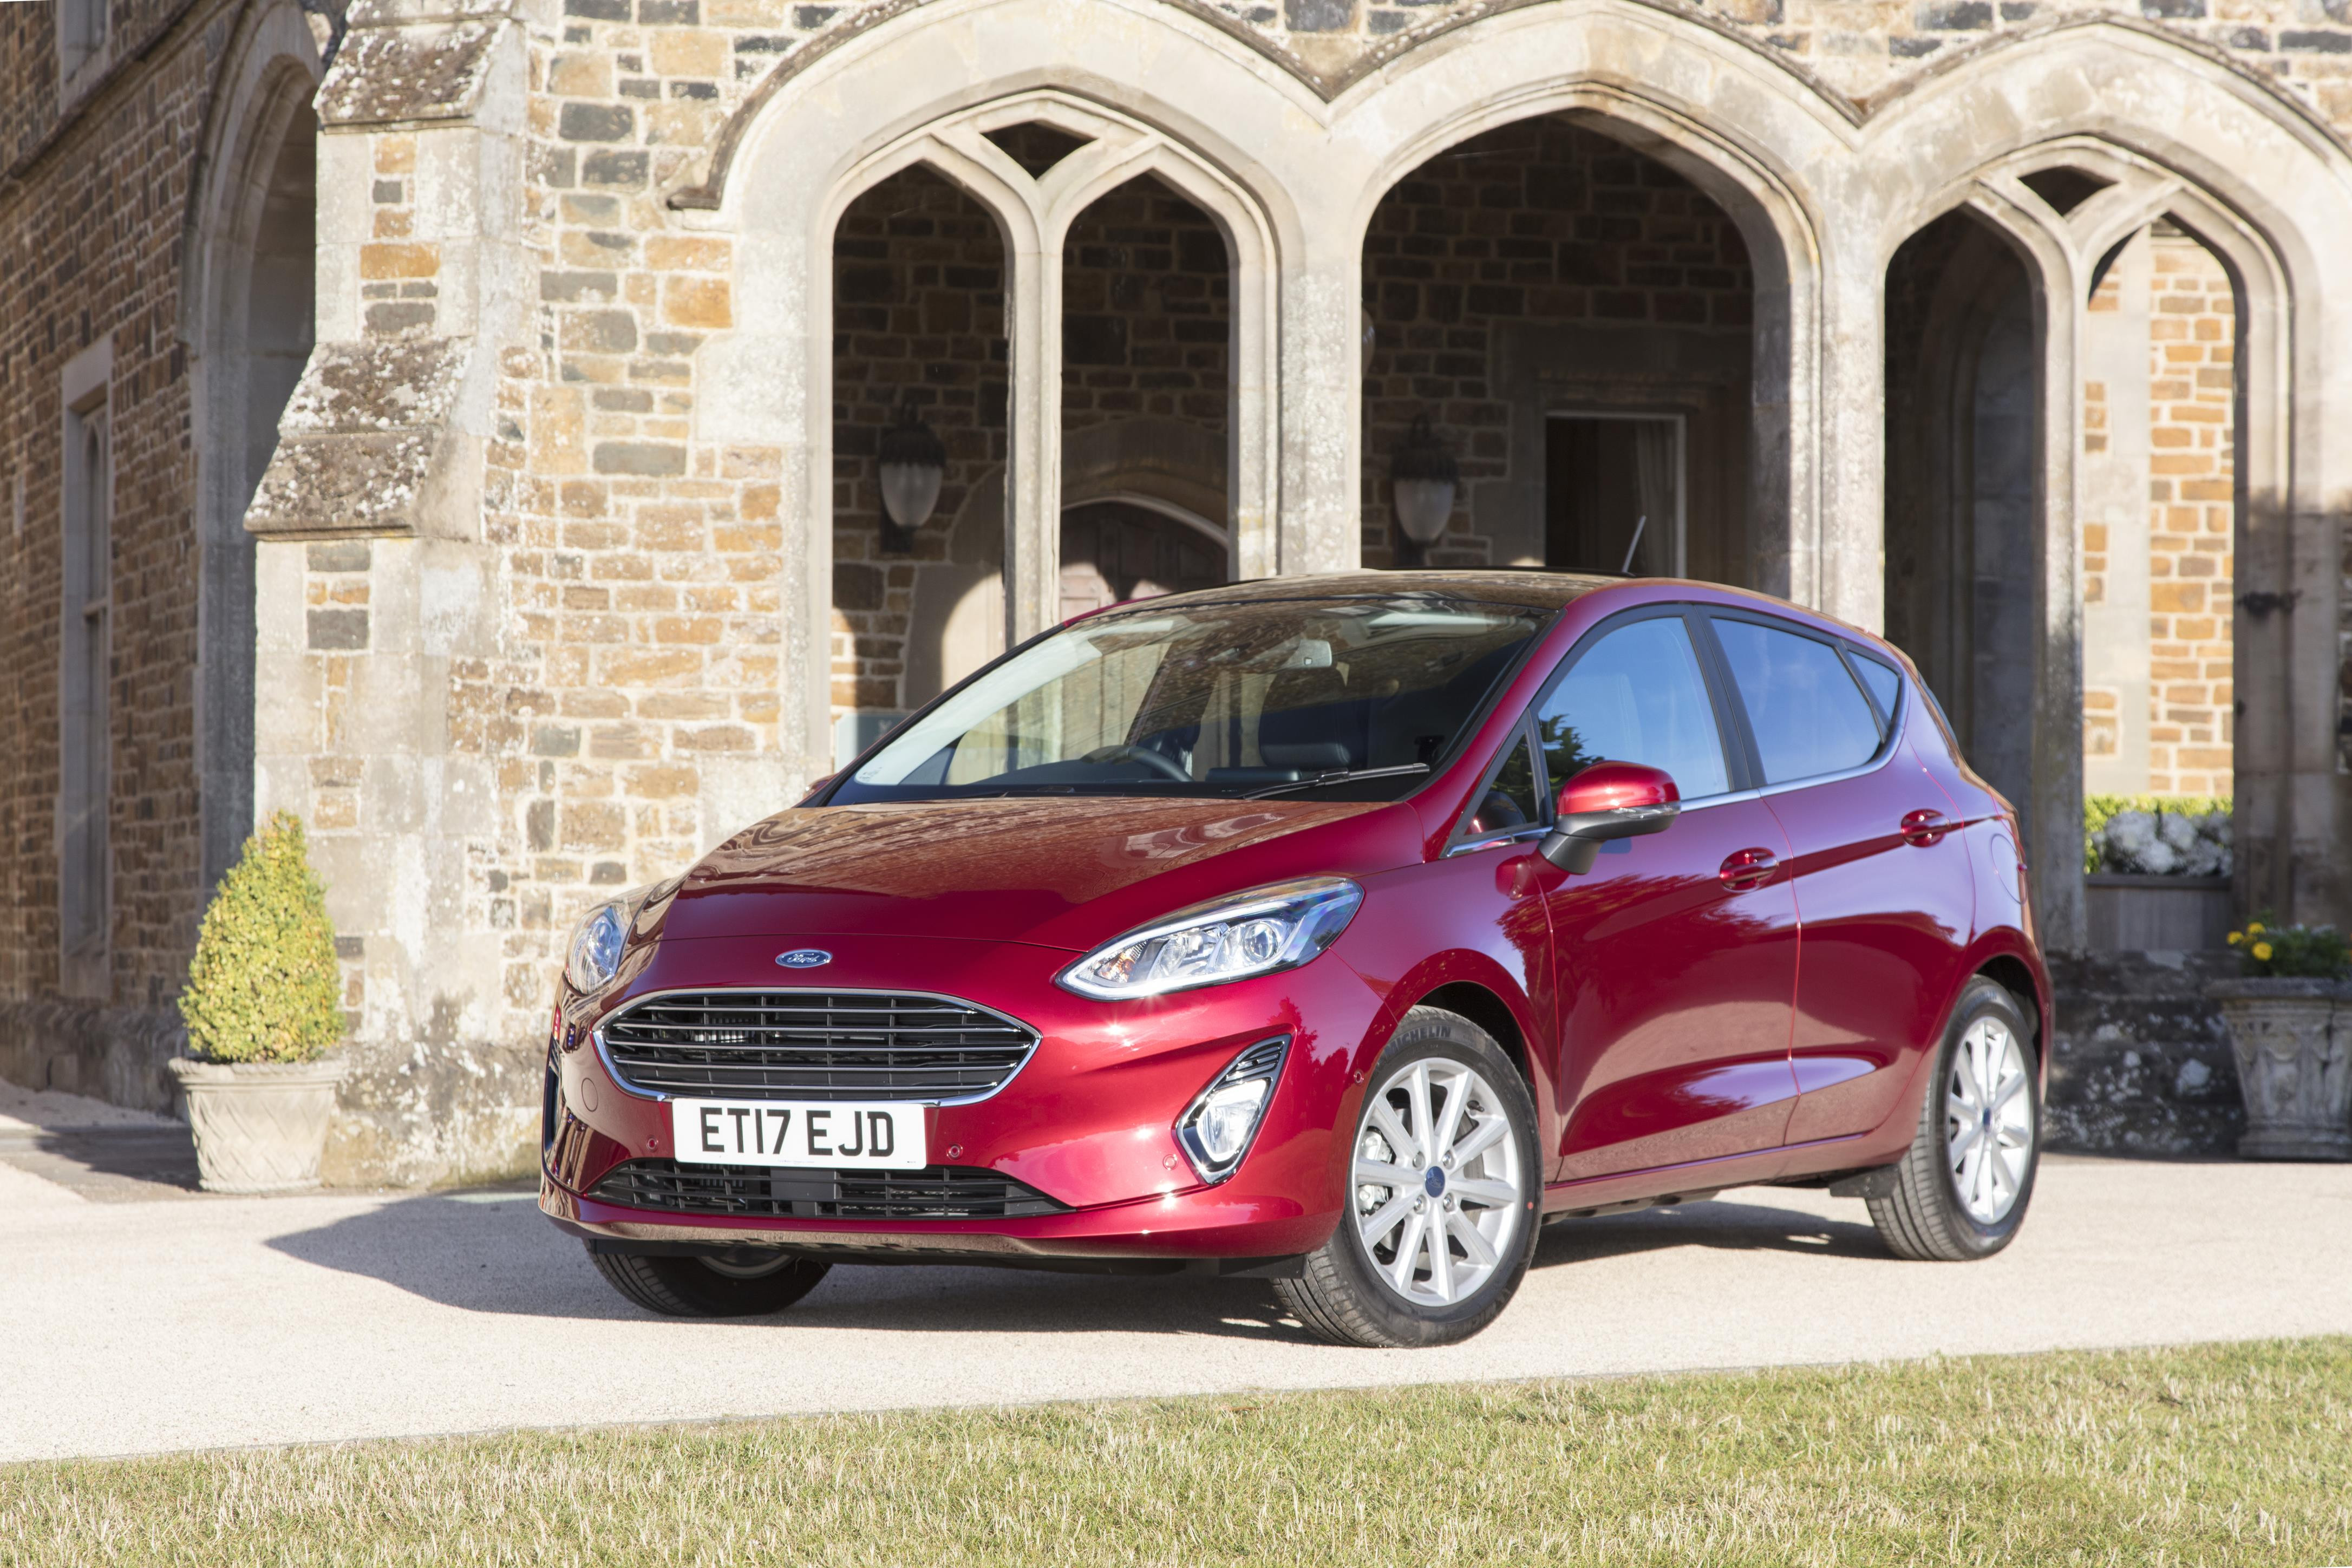 Dark red Ford Fiesta parked facing three-quarters left in front of gothic archways.